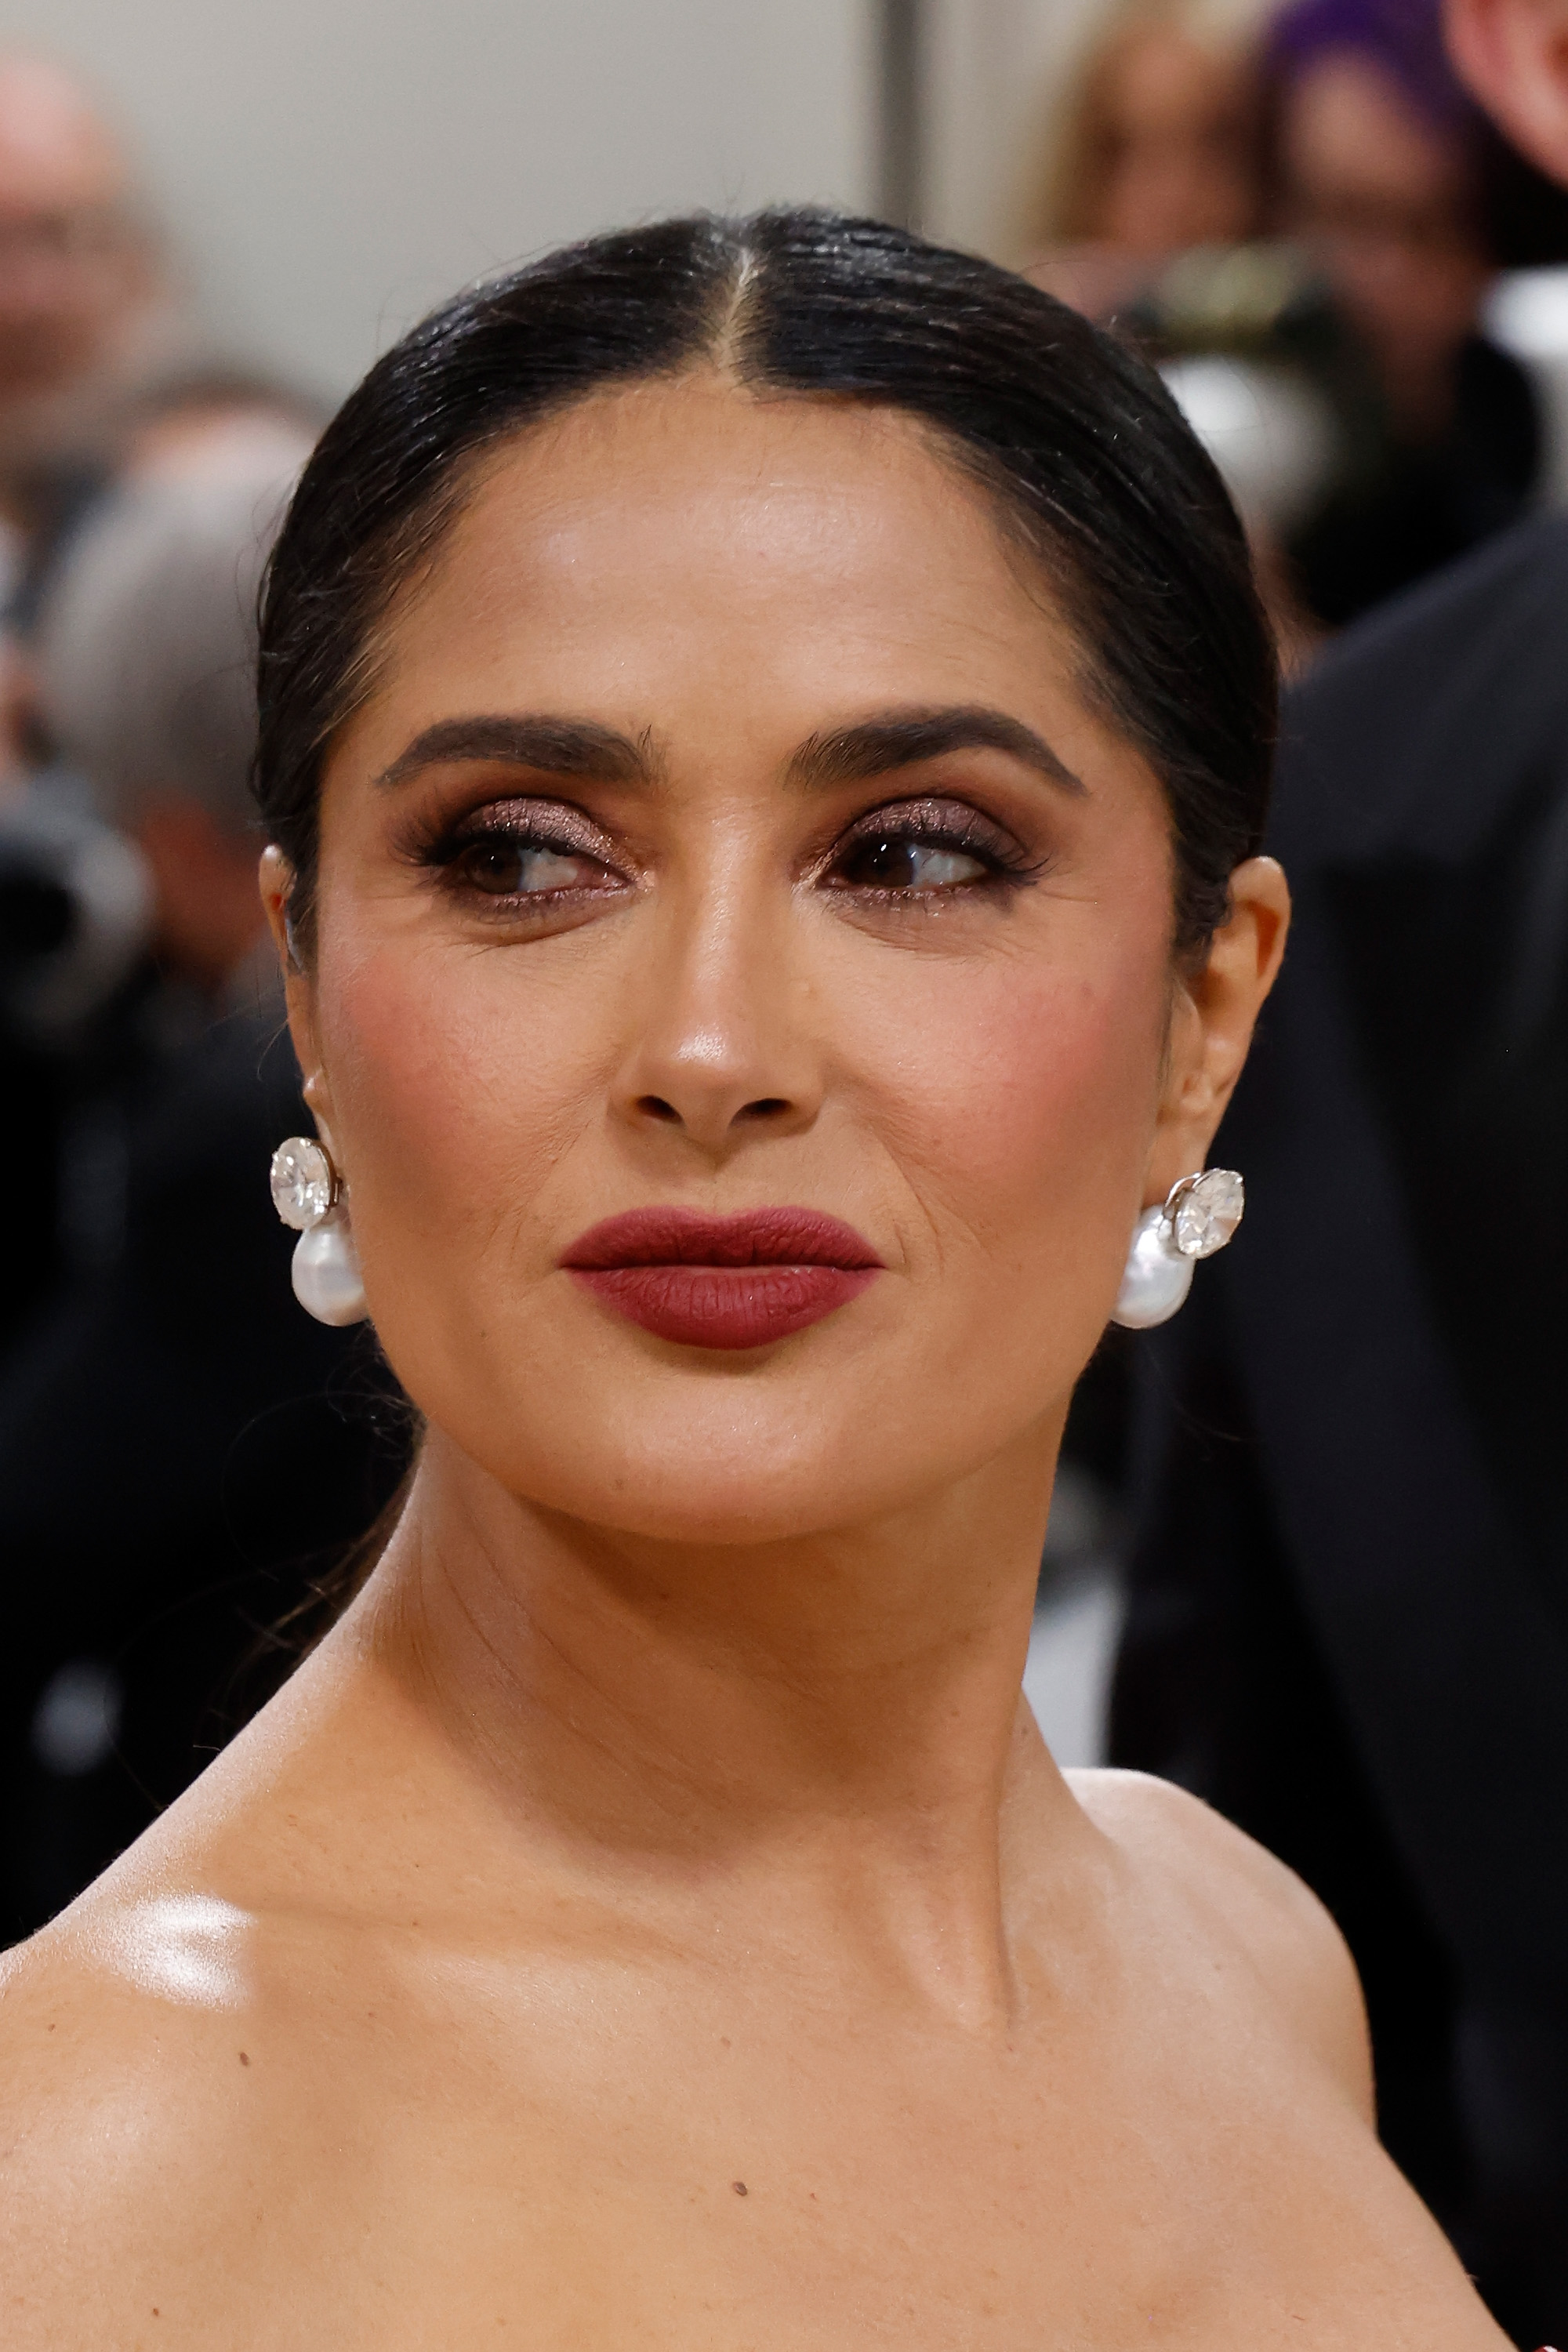 Salma Hayek Pinault on May 01, 2023 in New York City. | Source: Getty Images